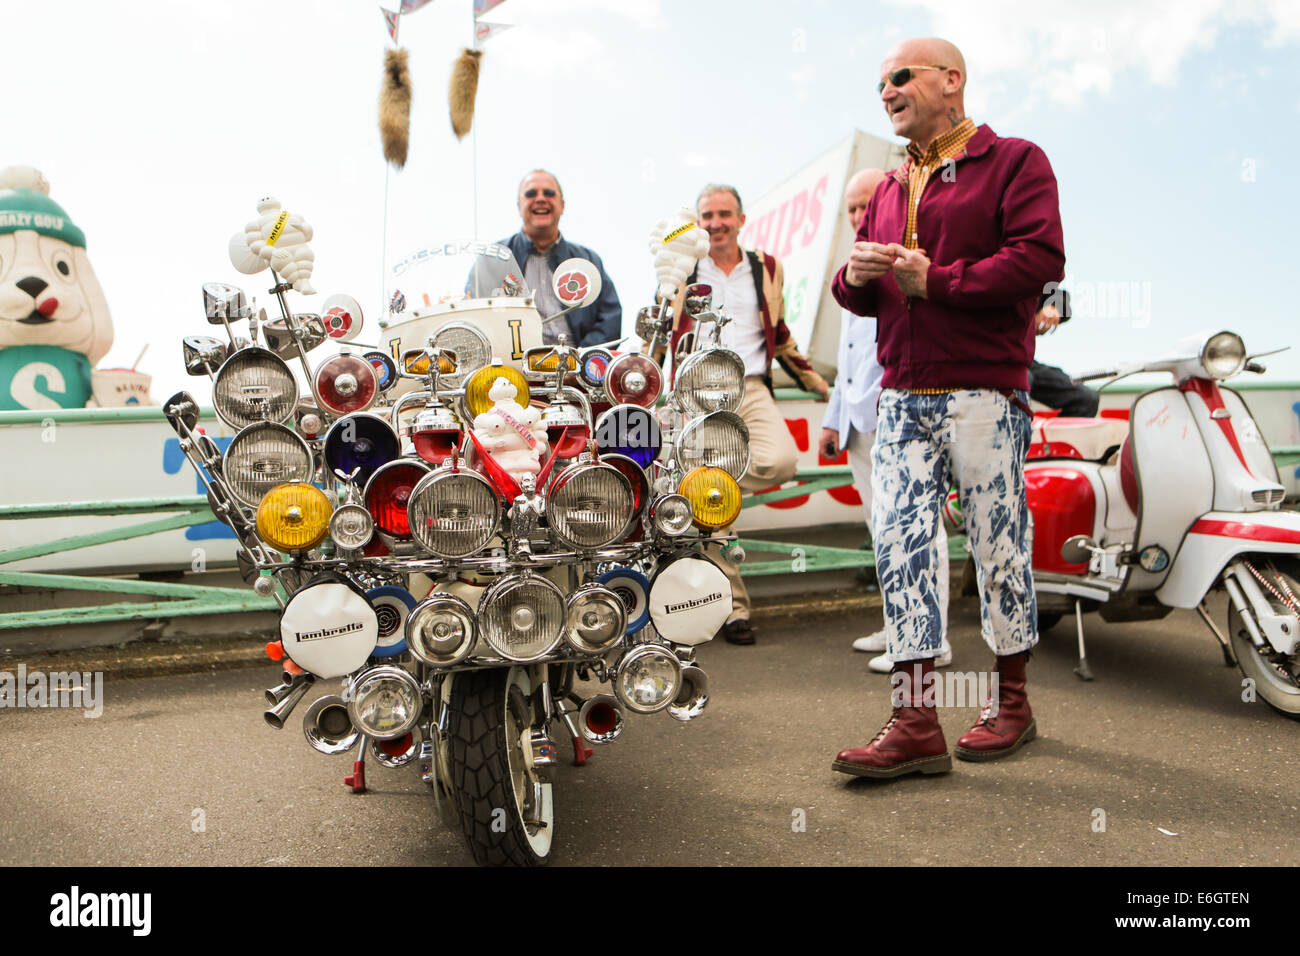 Mod All Weekender, Brighton 2014, Madeira Drive, Brighton, East Sussex, UK  . This is a gathering of British Mod culture annual event on the south coast of England with the classic scooter as the chosen mode of transport. 23rd August 2014 David Smith Alamy Live News Stock Photo